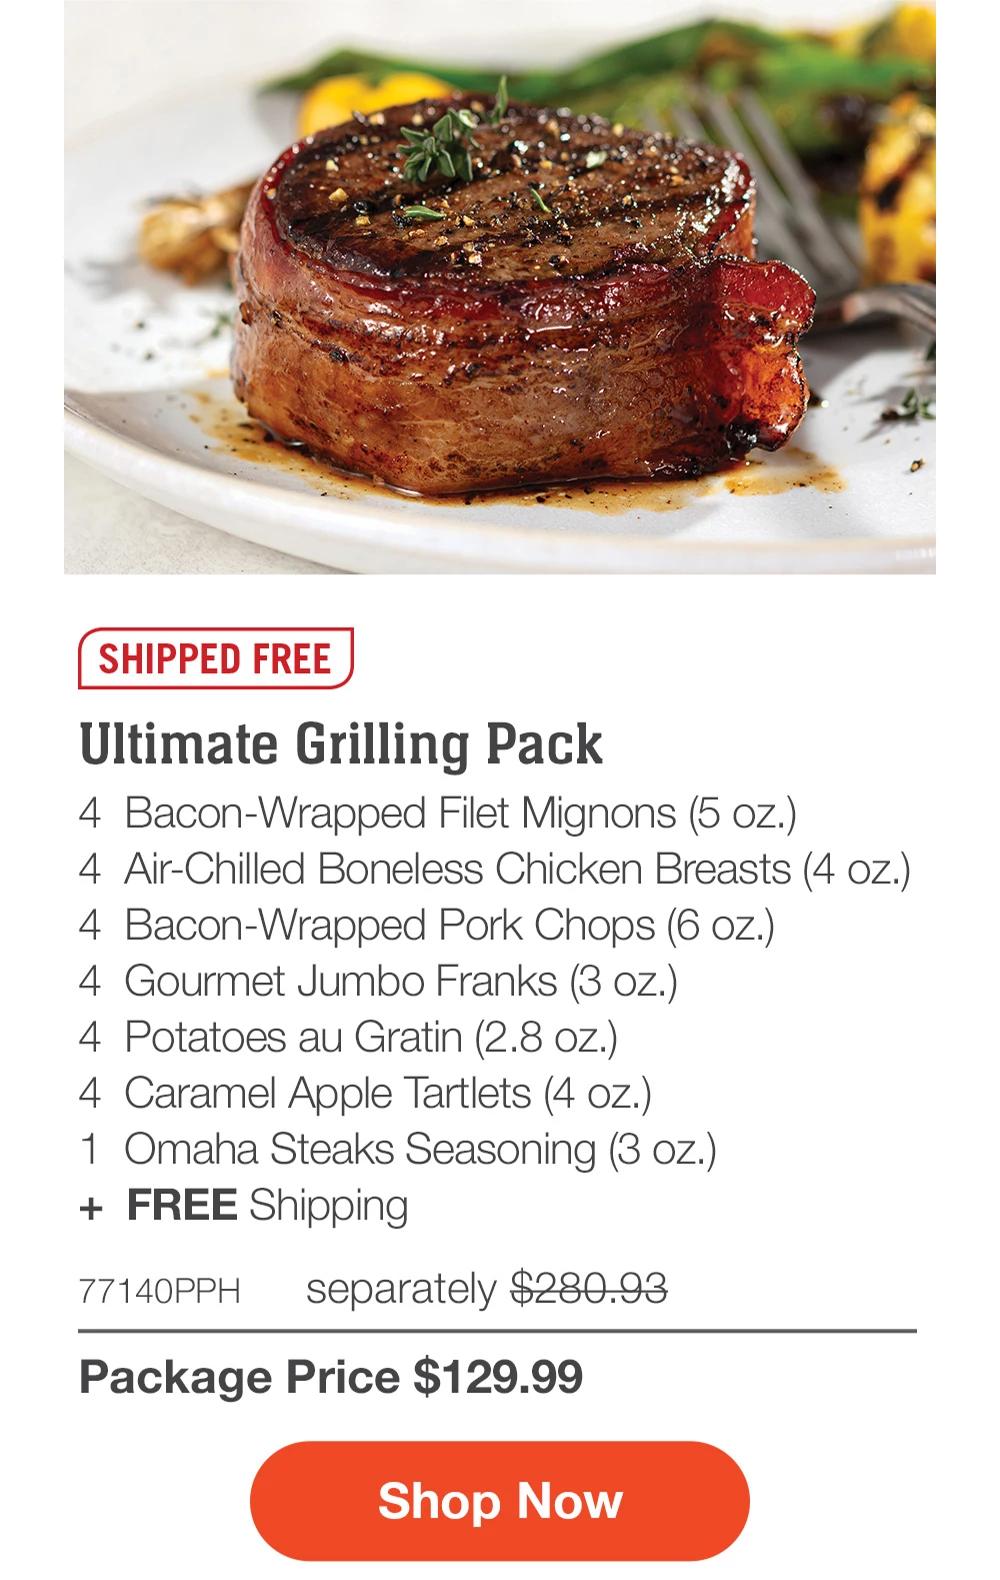 SHIPPED FREE | Ultimate Grilling Pack - 4 Bacon-Wrapped Filet Mignons (5 oz.) - 4 Bacon-Wrapped Pork Chops (6 oz.) - 4 Air-Chilled Boneless Chicken Breasts (4 oz.) - 4 Gourmet Jumbo Franks (3 oz.) - 4 Potatoes au Gratin (2.8 oz.) - 4 Caramel Apple Tartlets (4 oz.) - 1 Omaha Steaks Seasoning (3 oz.) + FREE Shipping - 77140PPH separately $280.93 | Package Price $129.99 || Shop Now